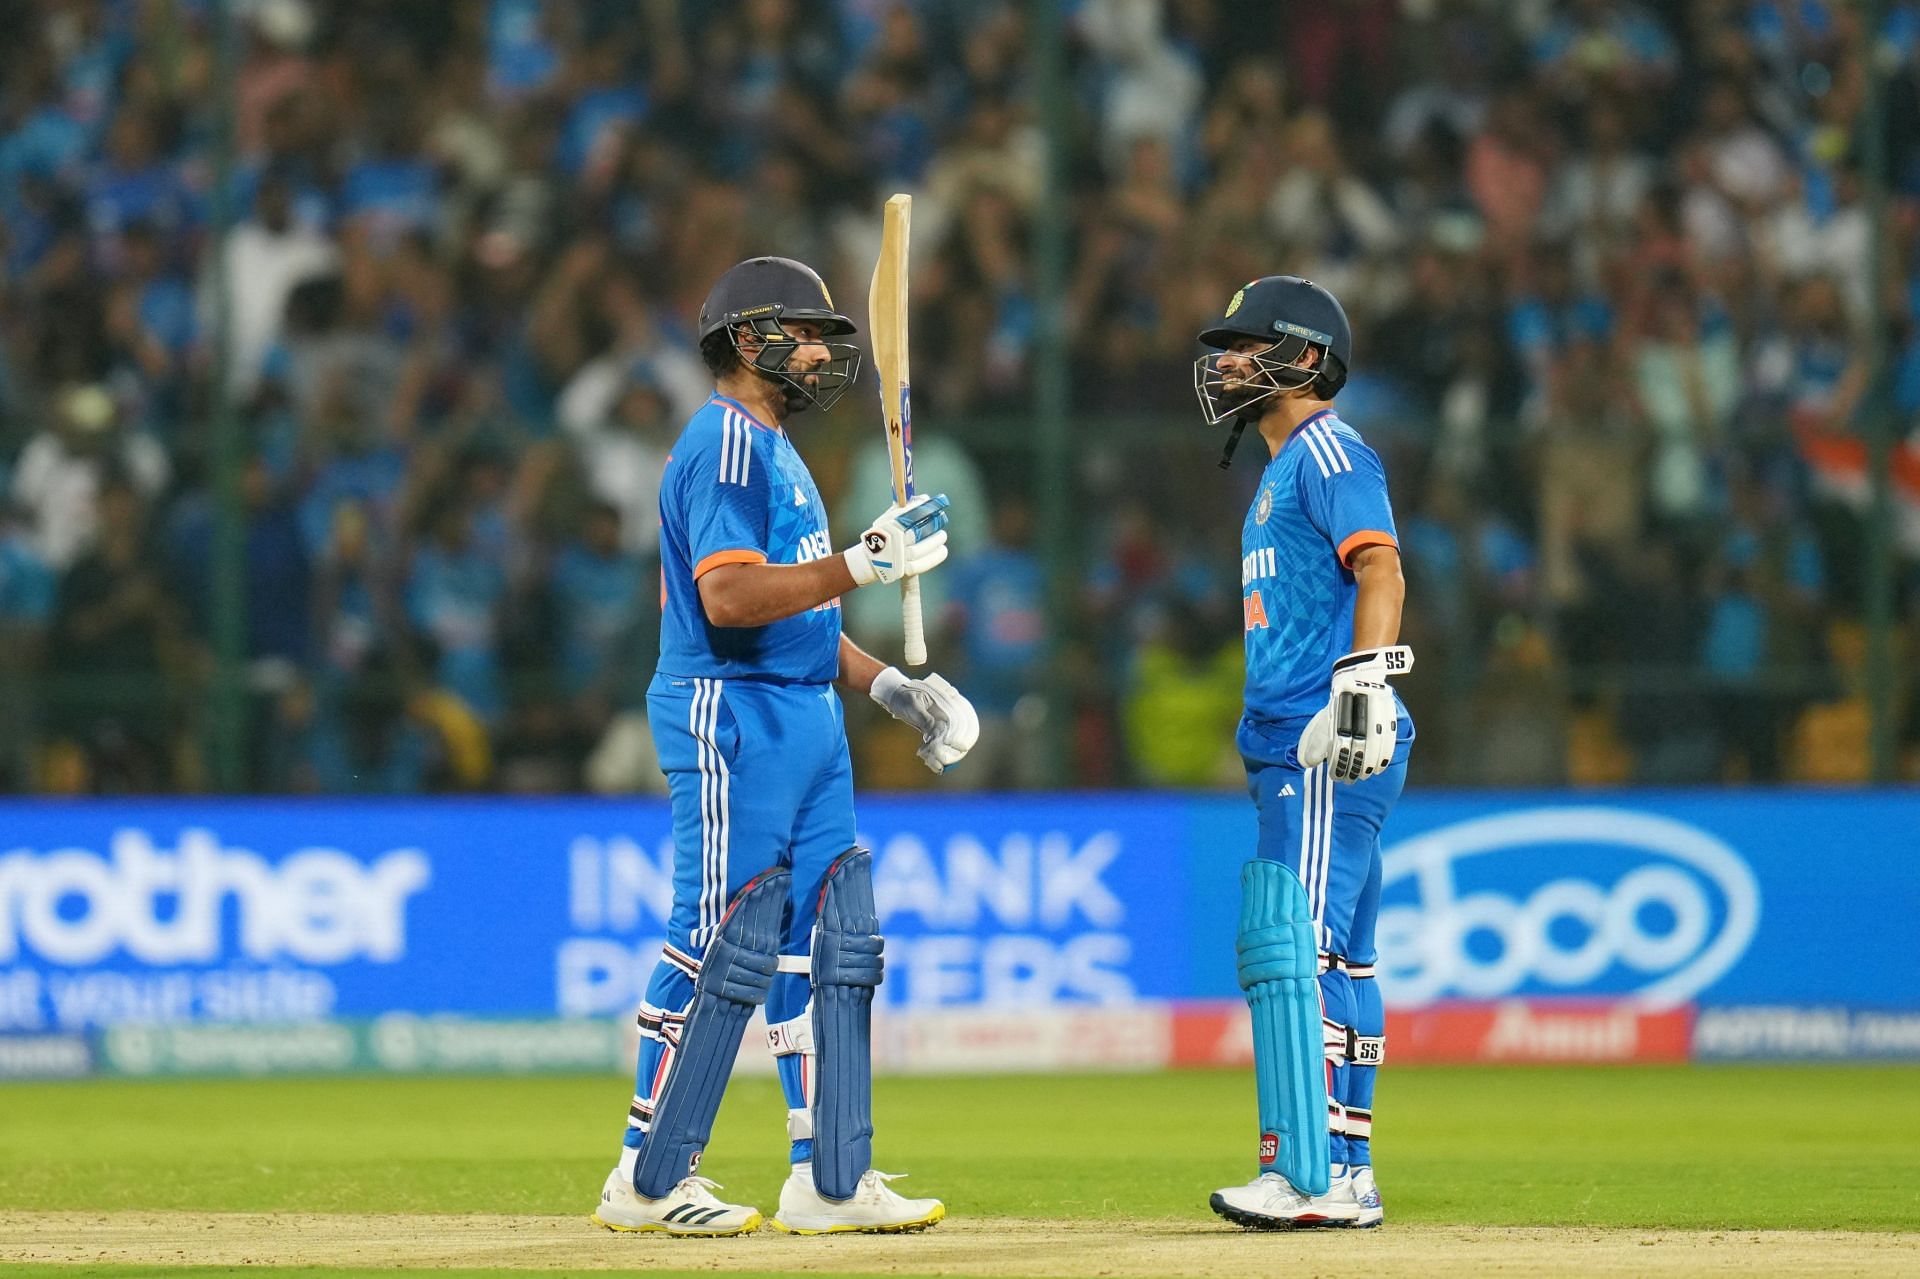 Rohit Sharma and Rinku Singh pulled India out of troubled waters with a massive partnership